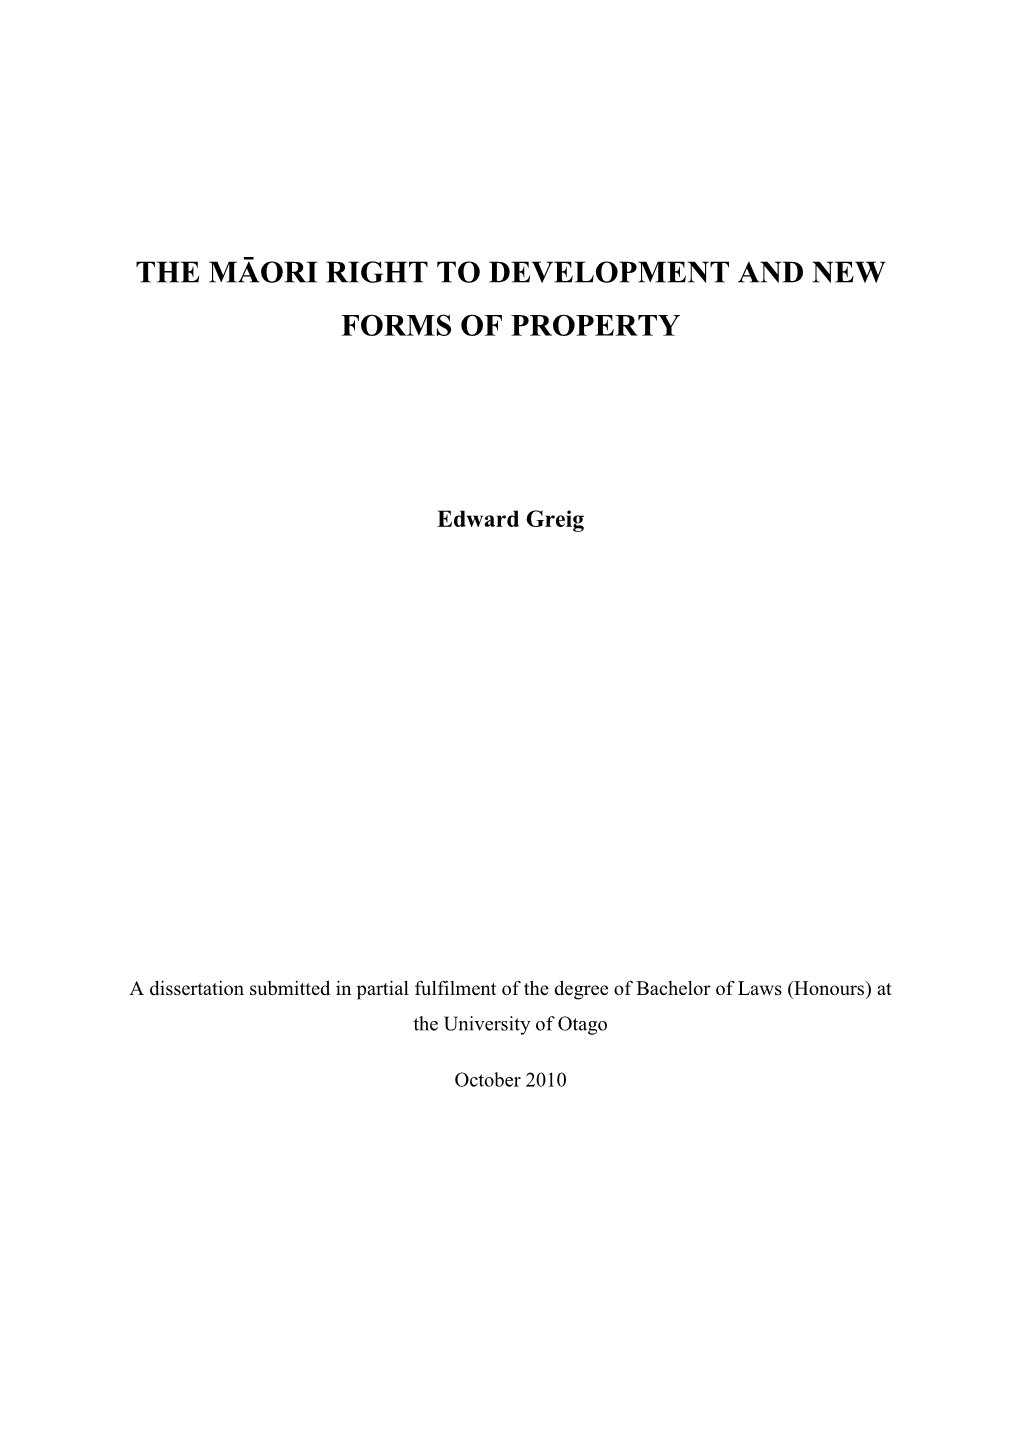 The Māori Right to Development and New Forms of Property